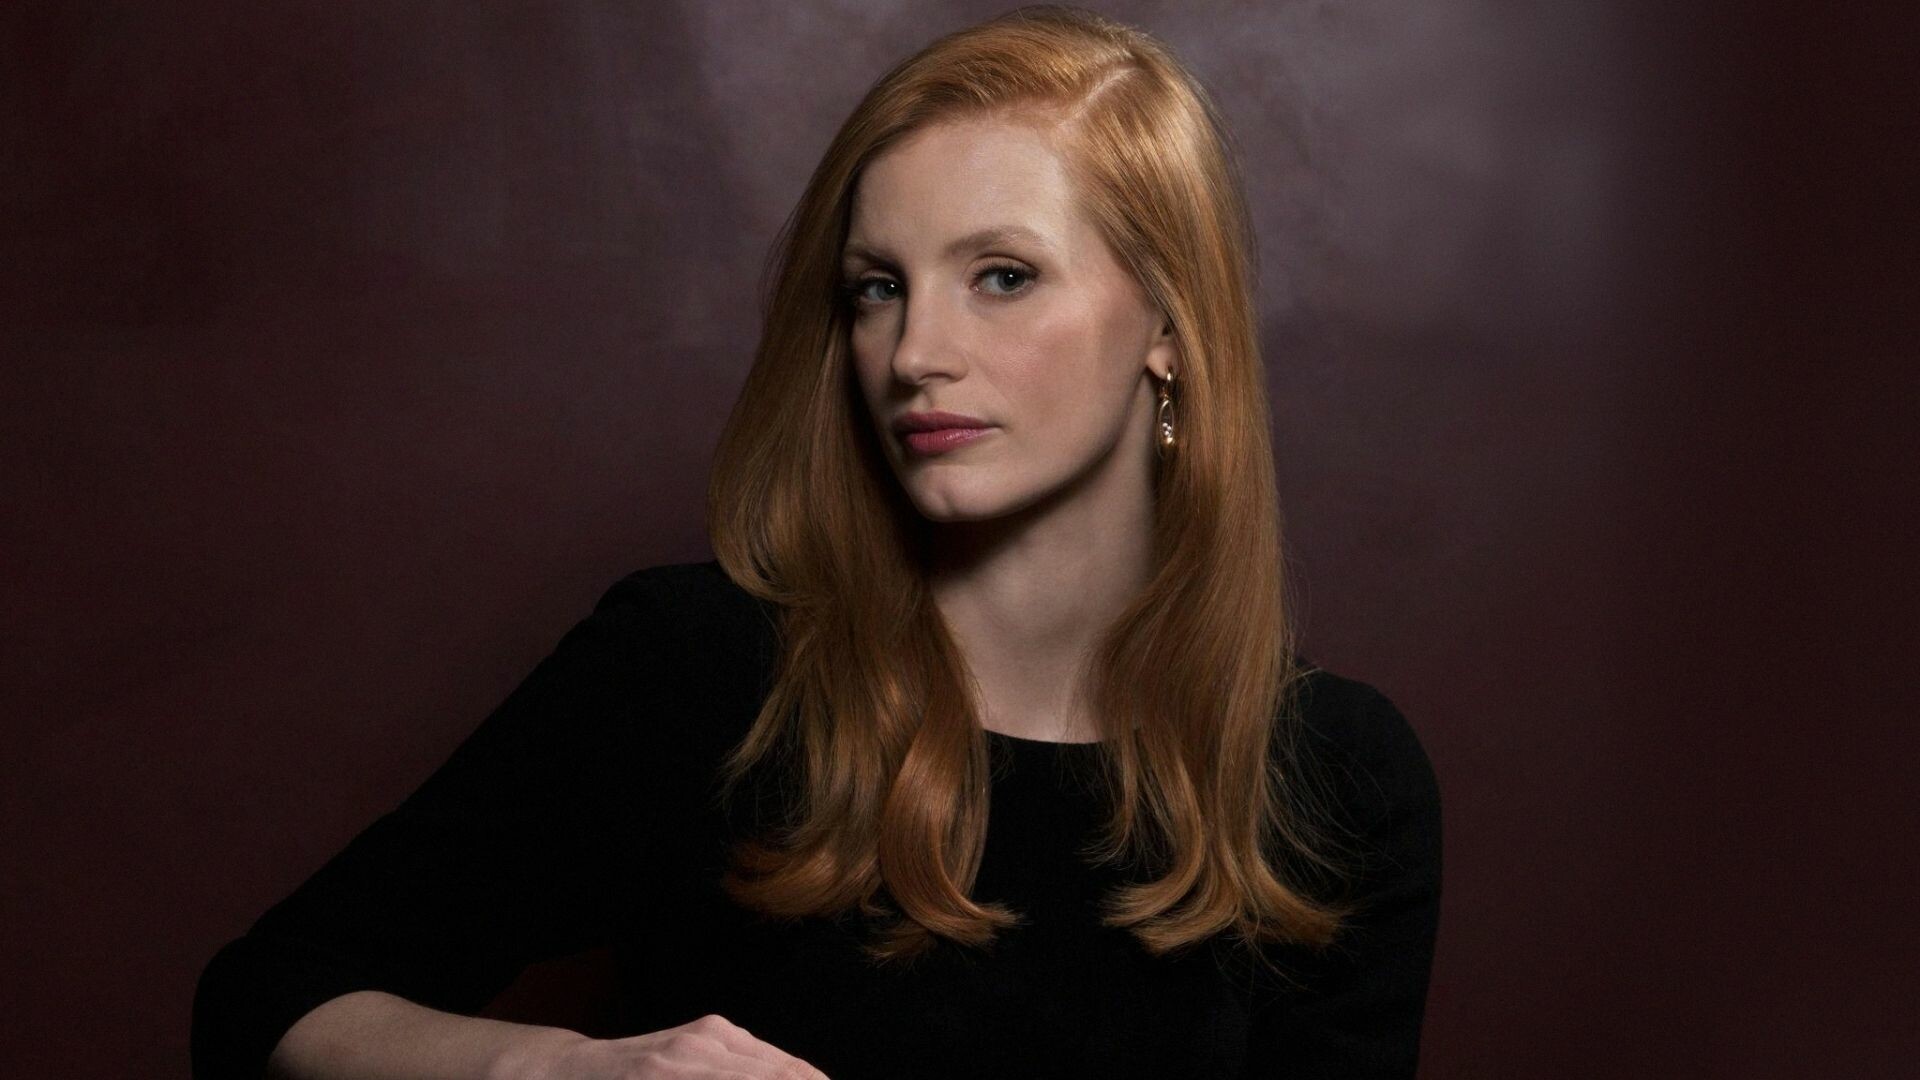 Jessica Chastain: Portrayed Detective Pam Stall in a 2011 American crime film, Texas Killing Fields. 1920x1080 Full HD Background.